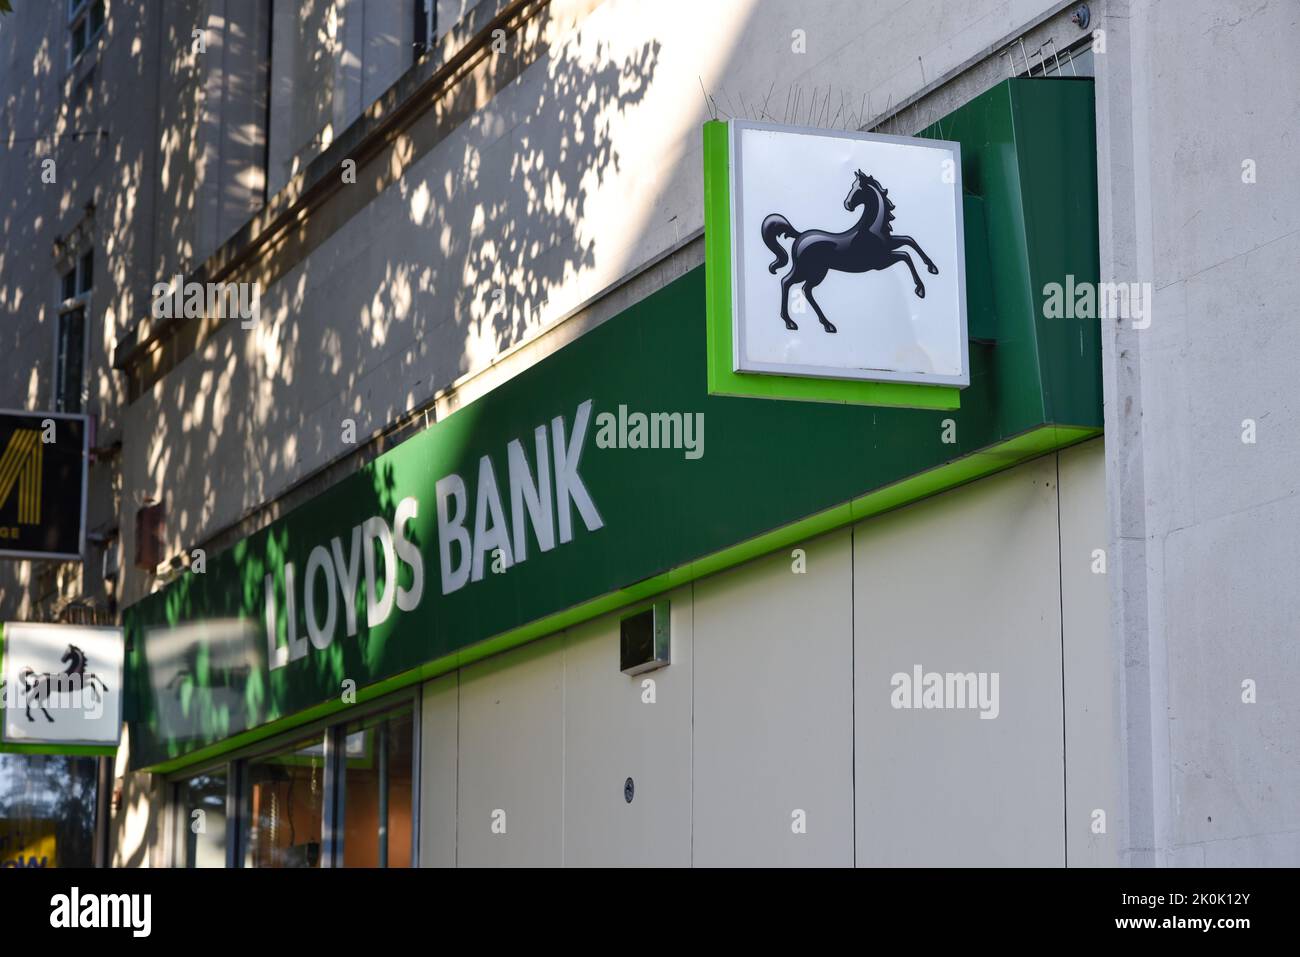 Exterior of a Lloyds bank high street branch in England showing the name and famous black horse logo. Stock Photo